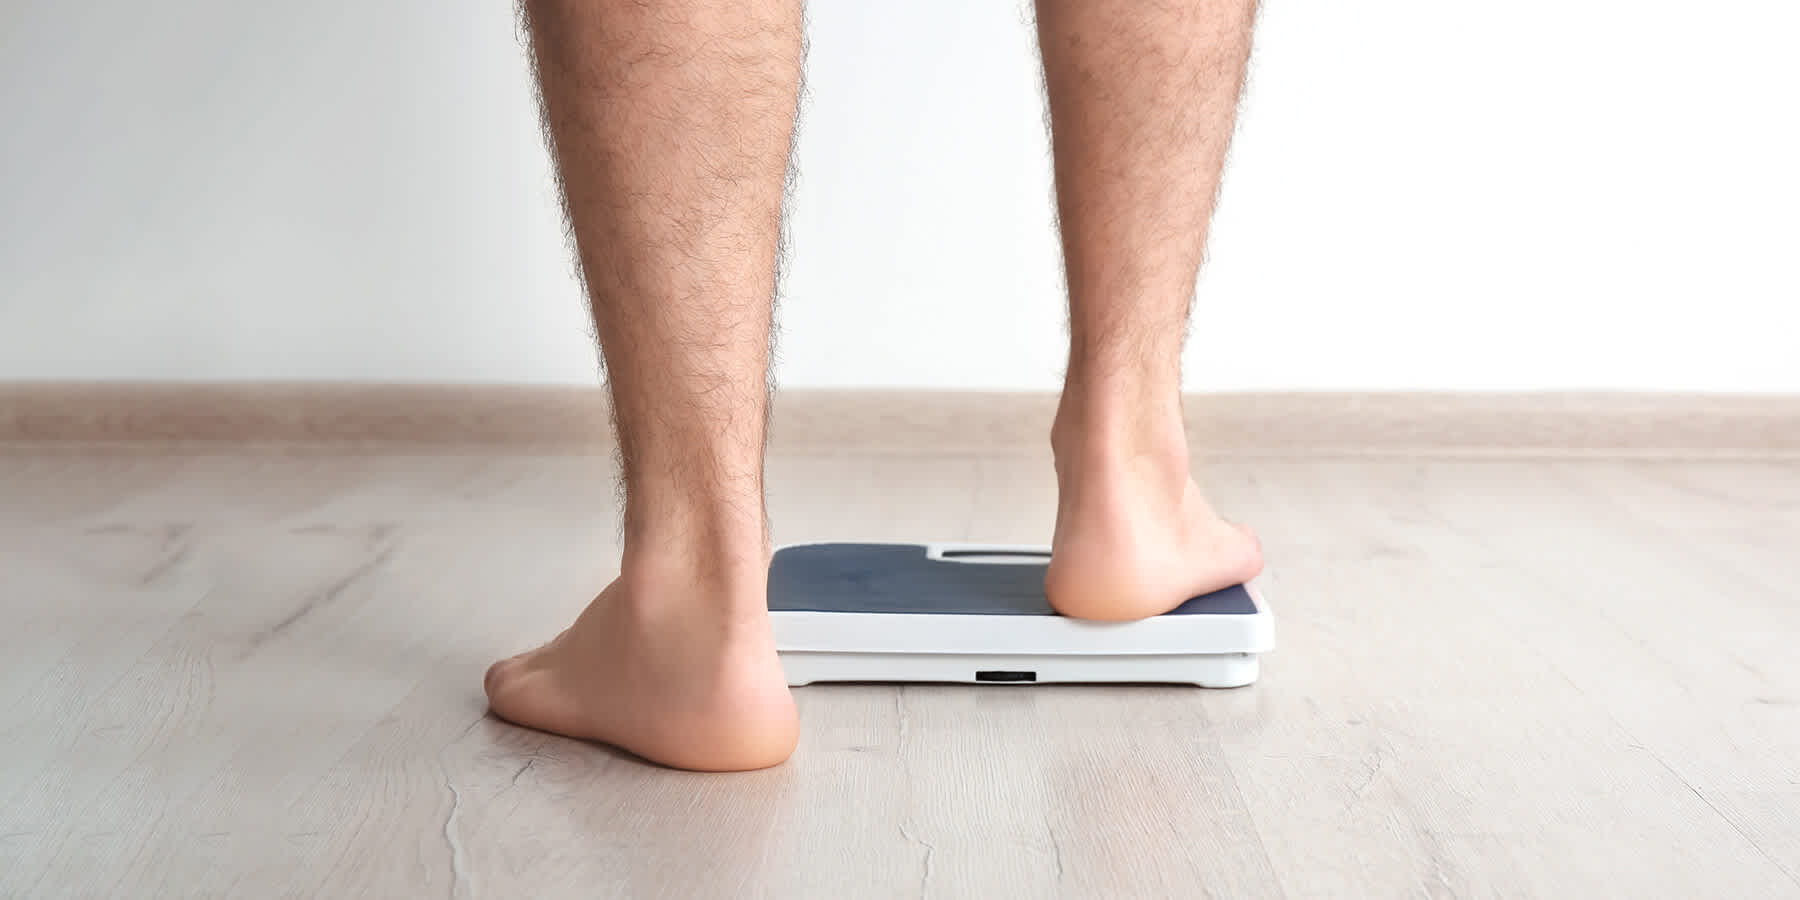 Person stepping onto bathroom scale while wondering what conditions have weight gain as a symptom